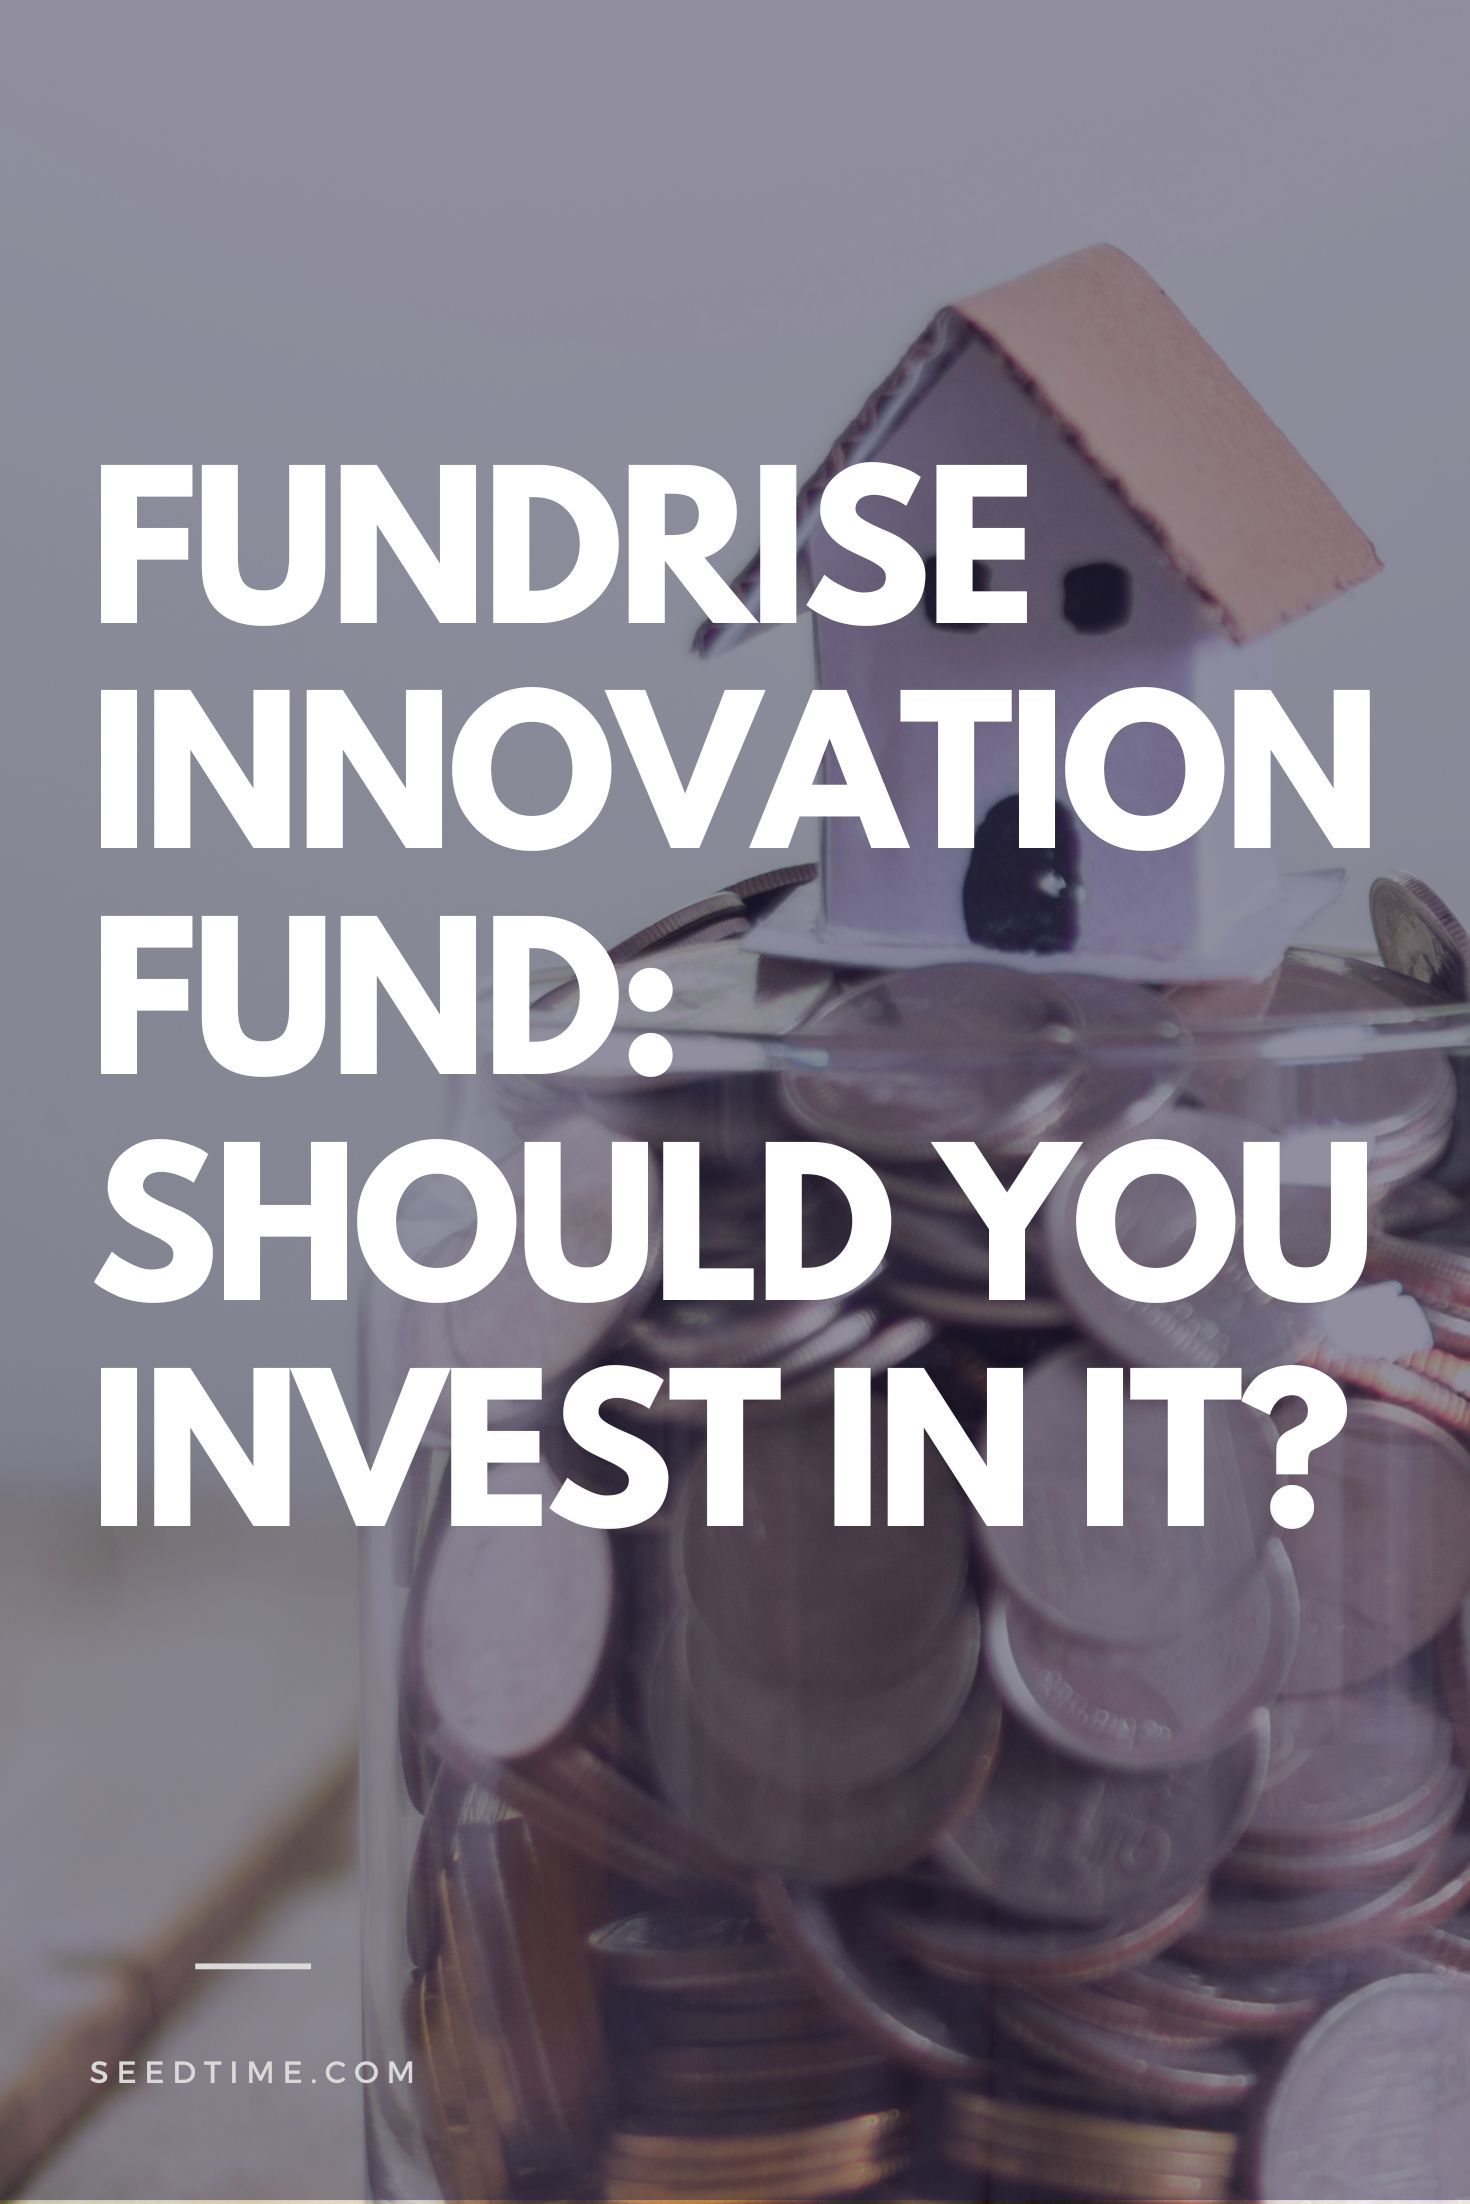 Fundrise Innovation Fund Should you invest in it